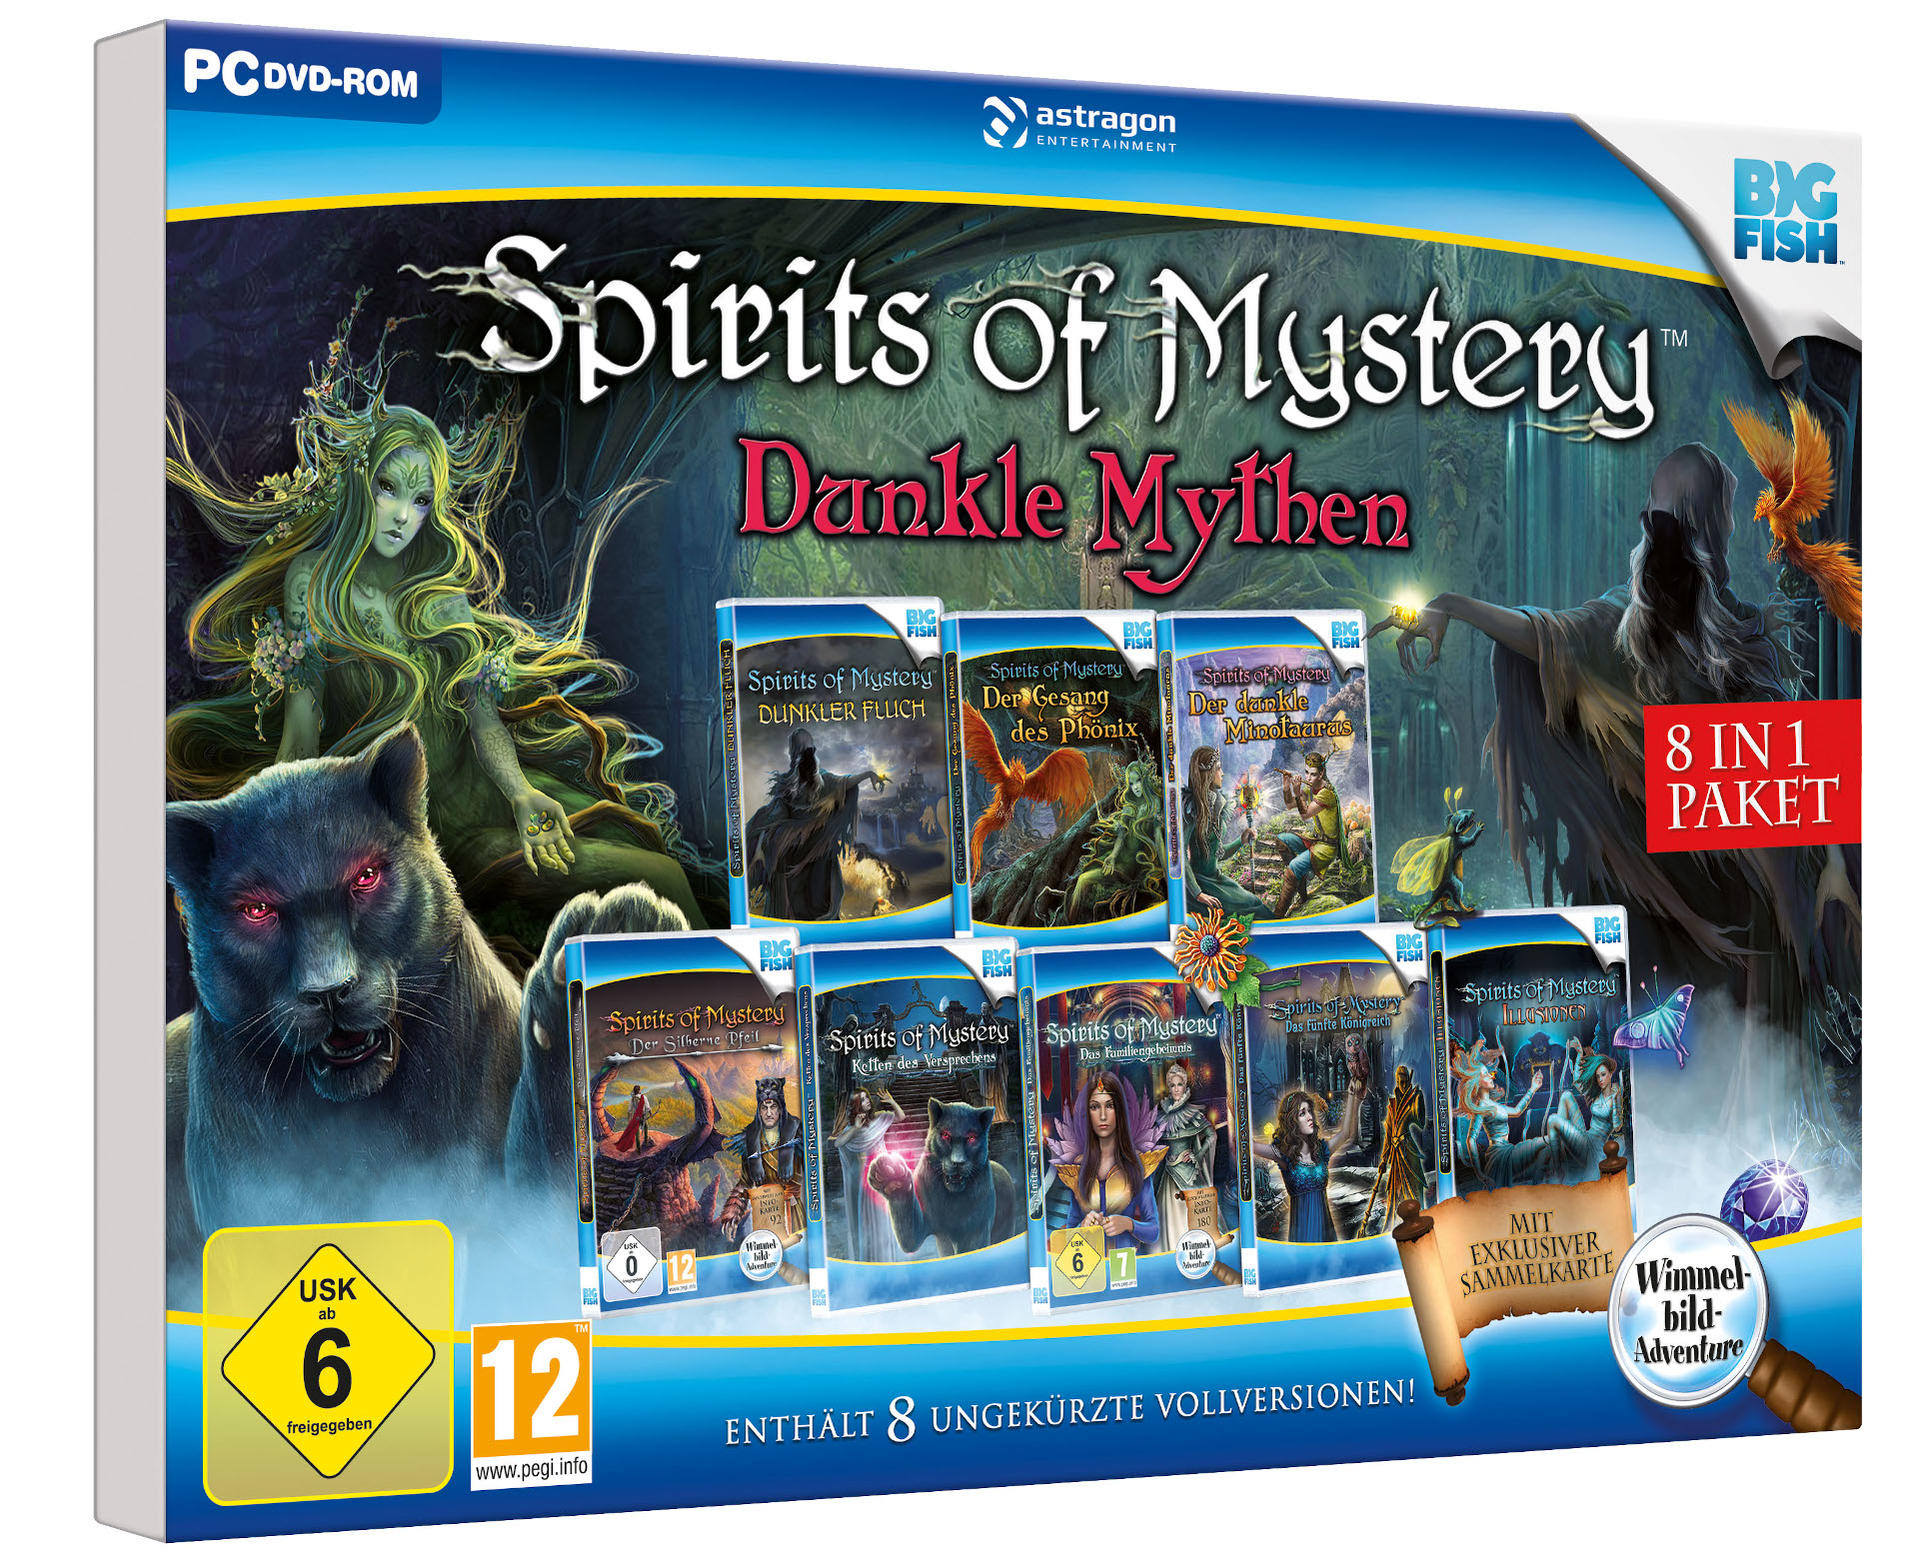 MYSTERY-DUNKLE IN 1 - 8 MYTHEN PAKET [PC] OF SPIRITS